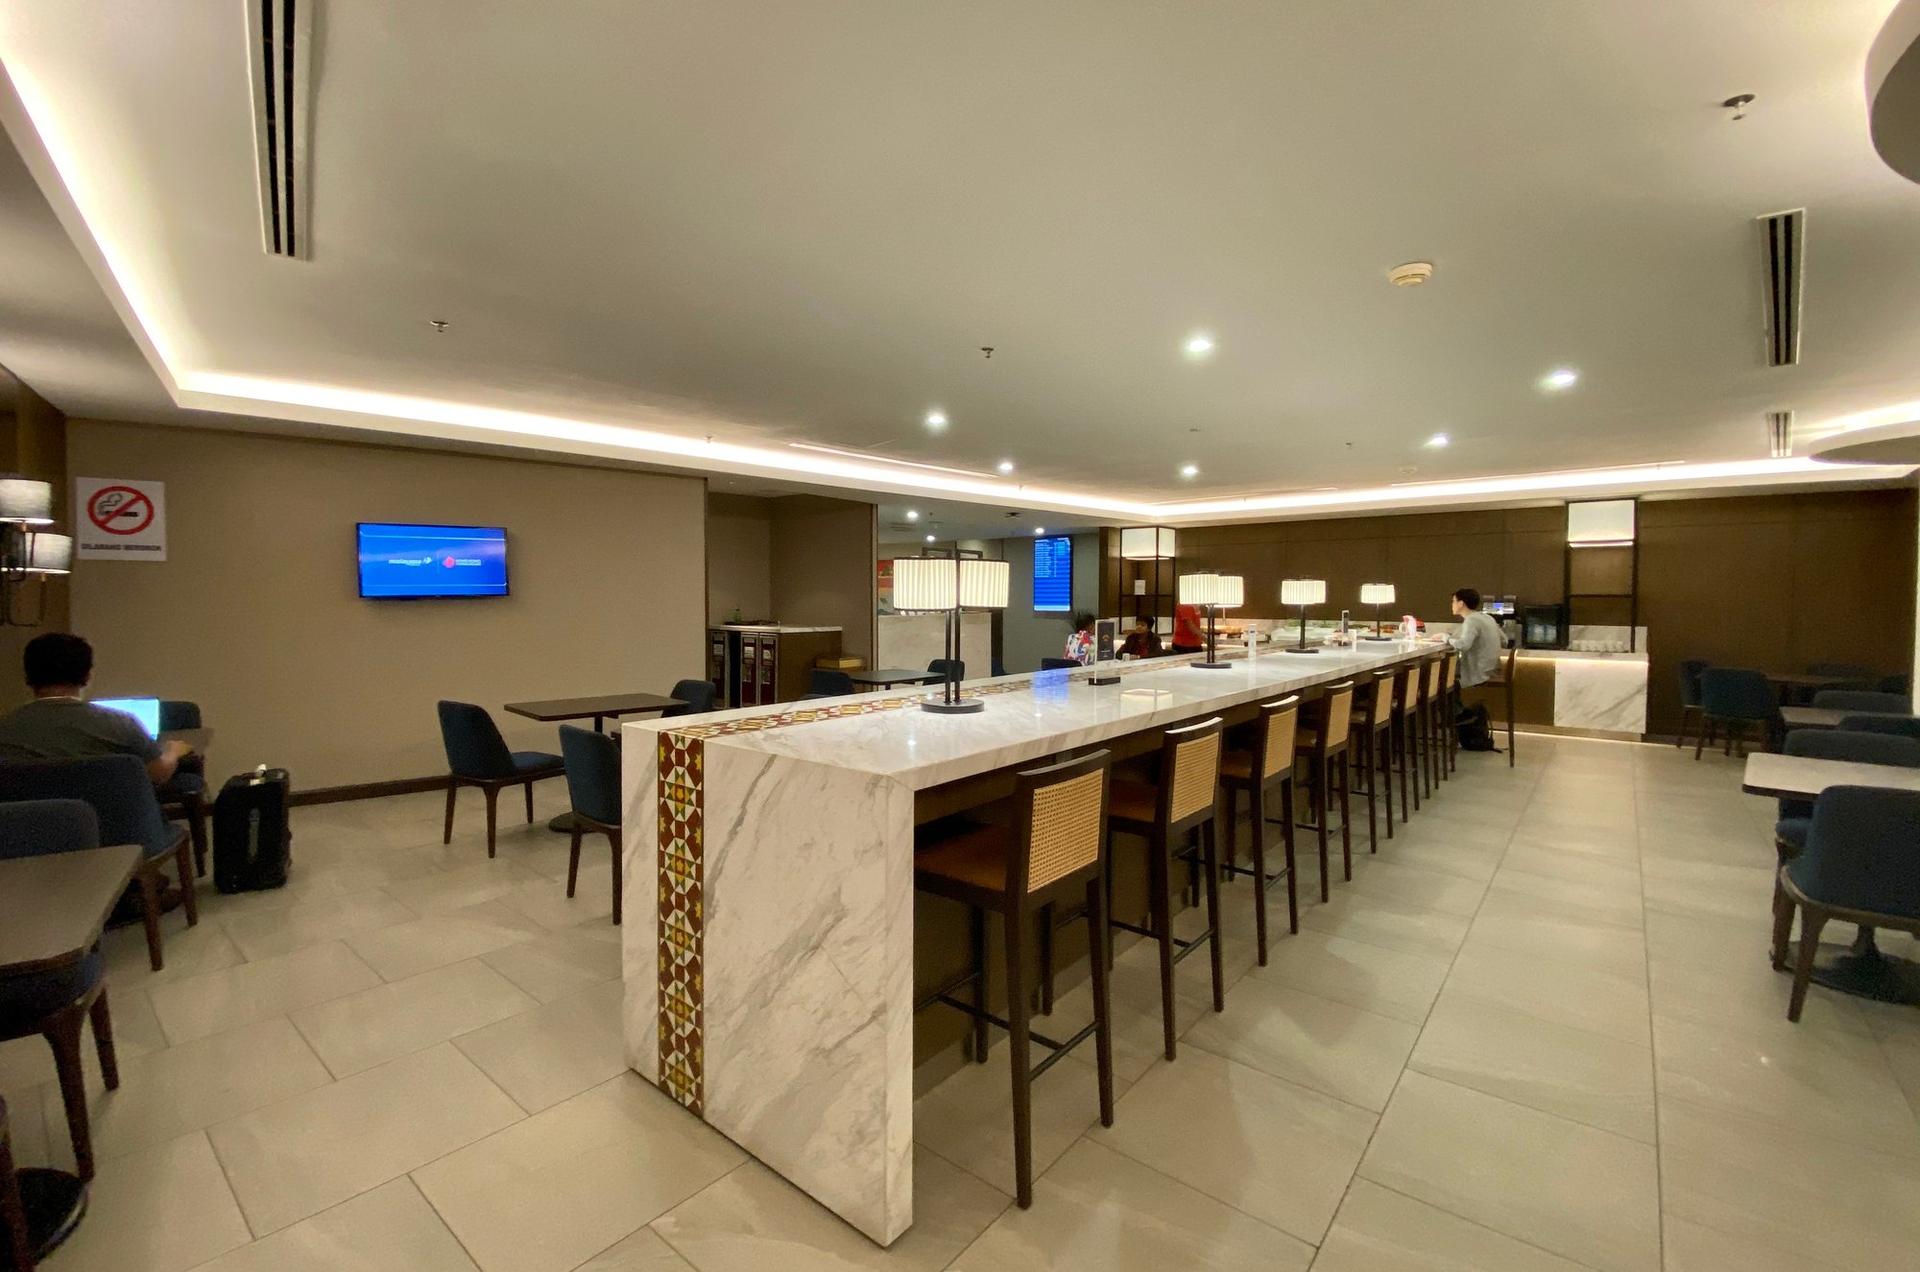 Malaysia Airlines Golden Lounge (Domestic) image 4 of 6